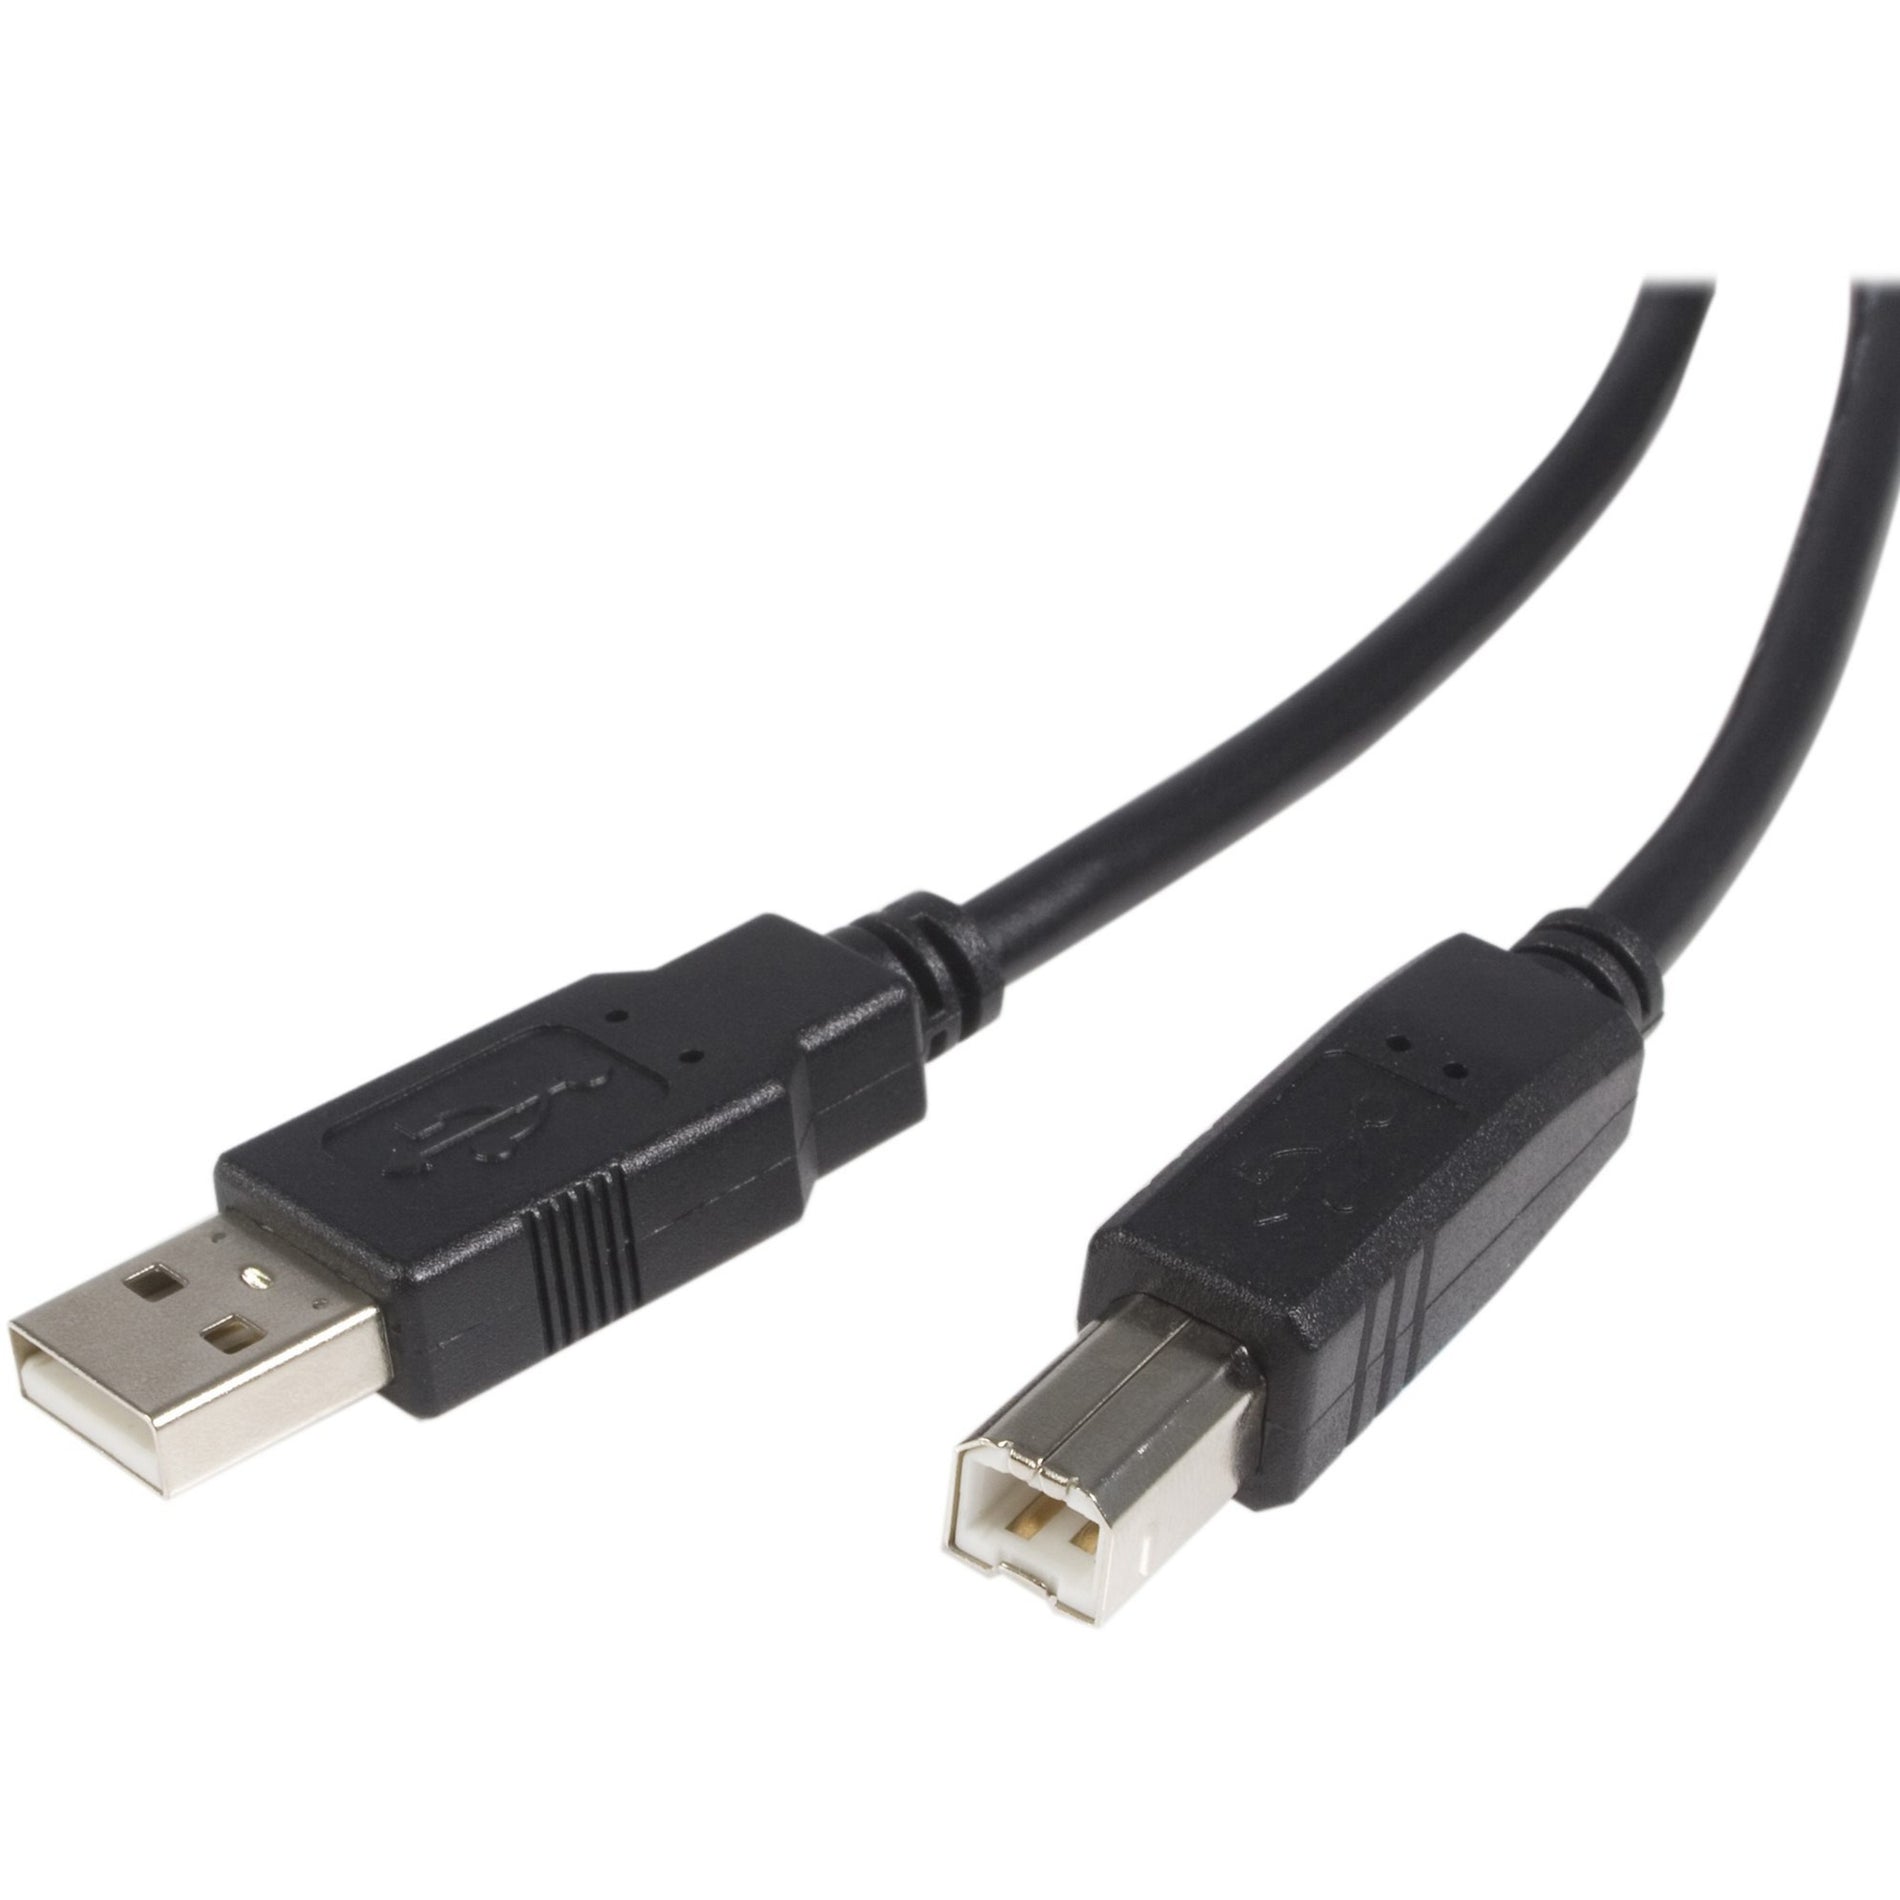 StarTech.com USB2HAB15 15 ft USB 2.0 A to B Cable - M/M, High-Speed Data Transfer, Lifetime Warranty